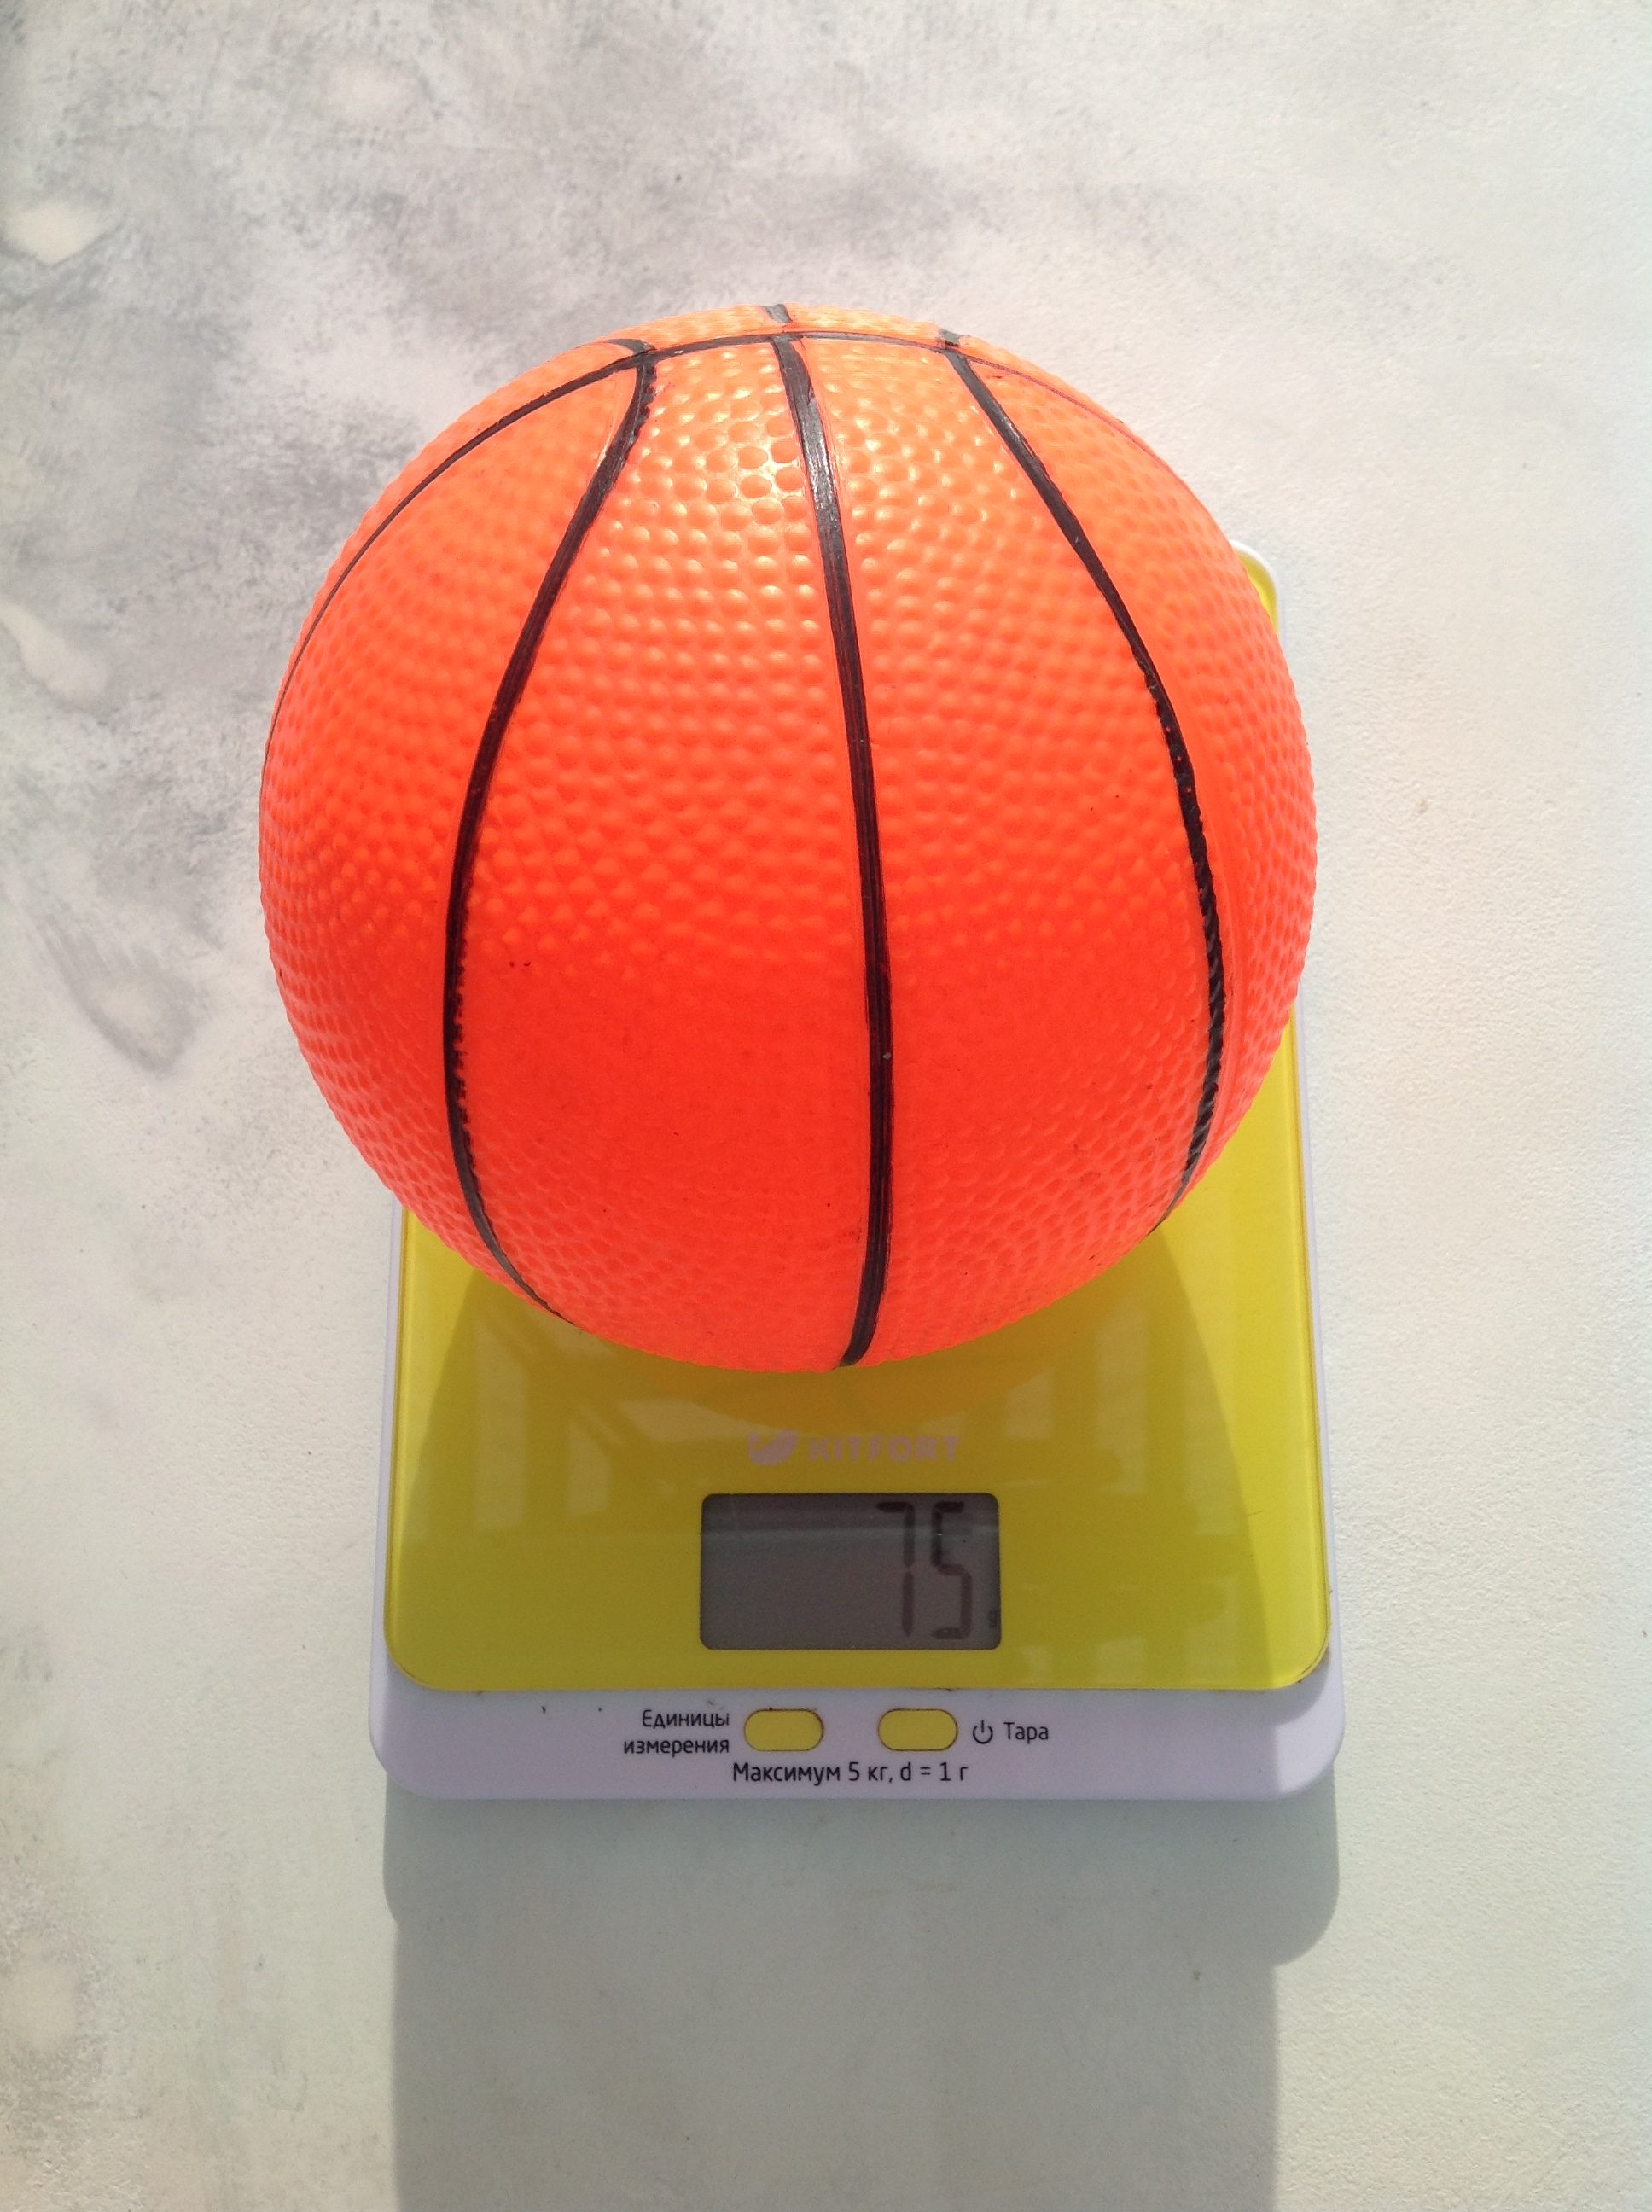 How much does a children's basketball weigh?